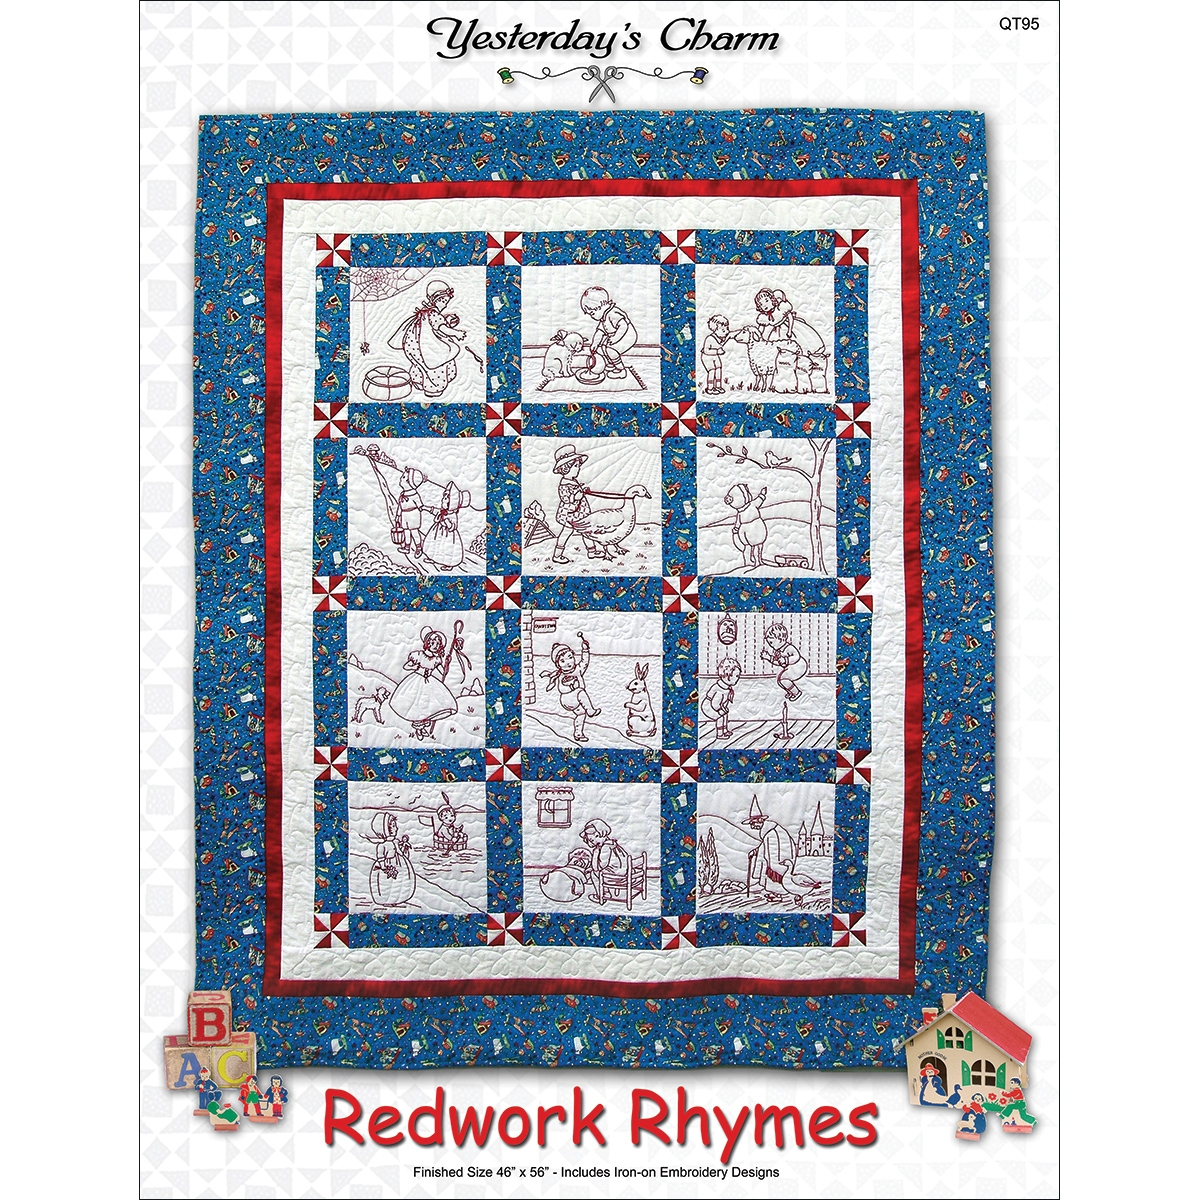 Free Redwork Machine Embroidery Patterns Redwork Rhymes Embroidery Transfers Quilt Pattern